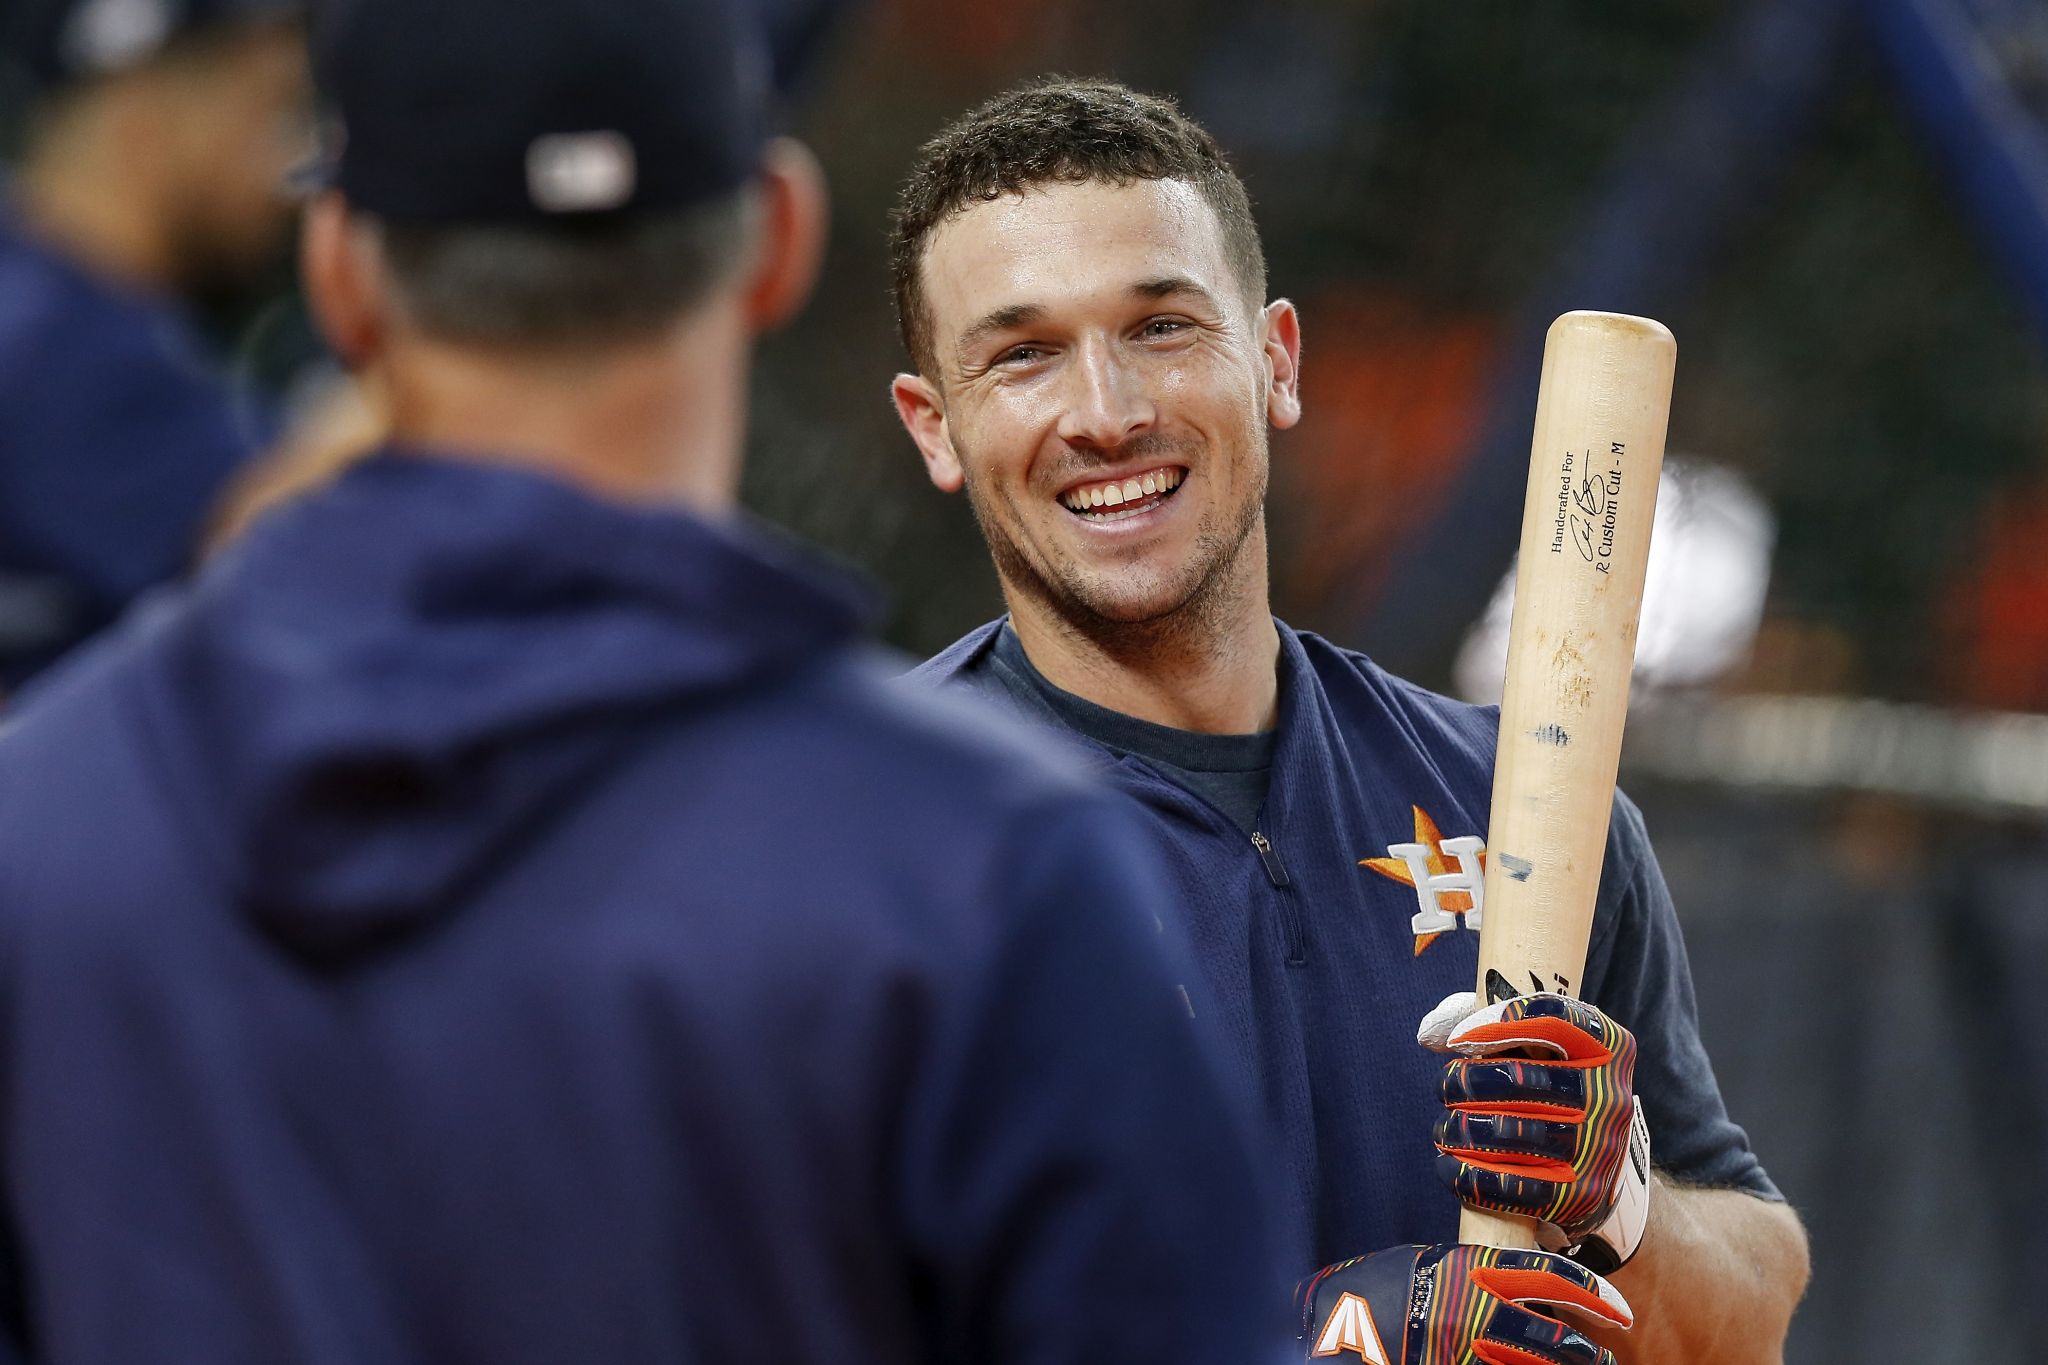 RIP to the Astros' Alex Bregman's deleted Twitter account